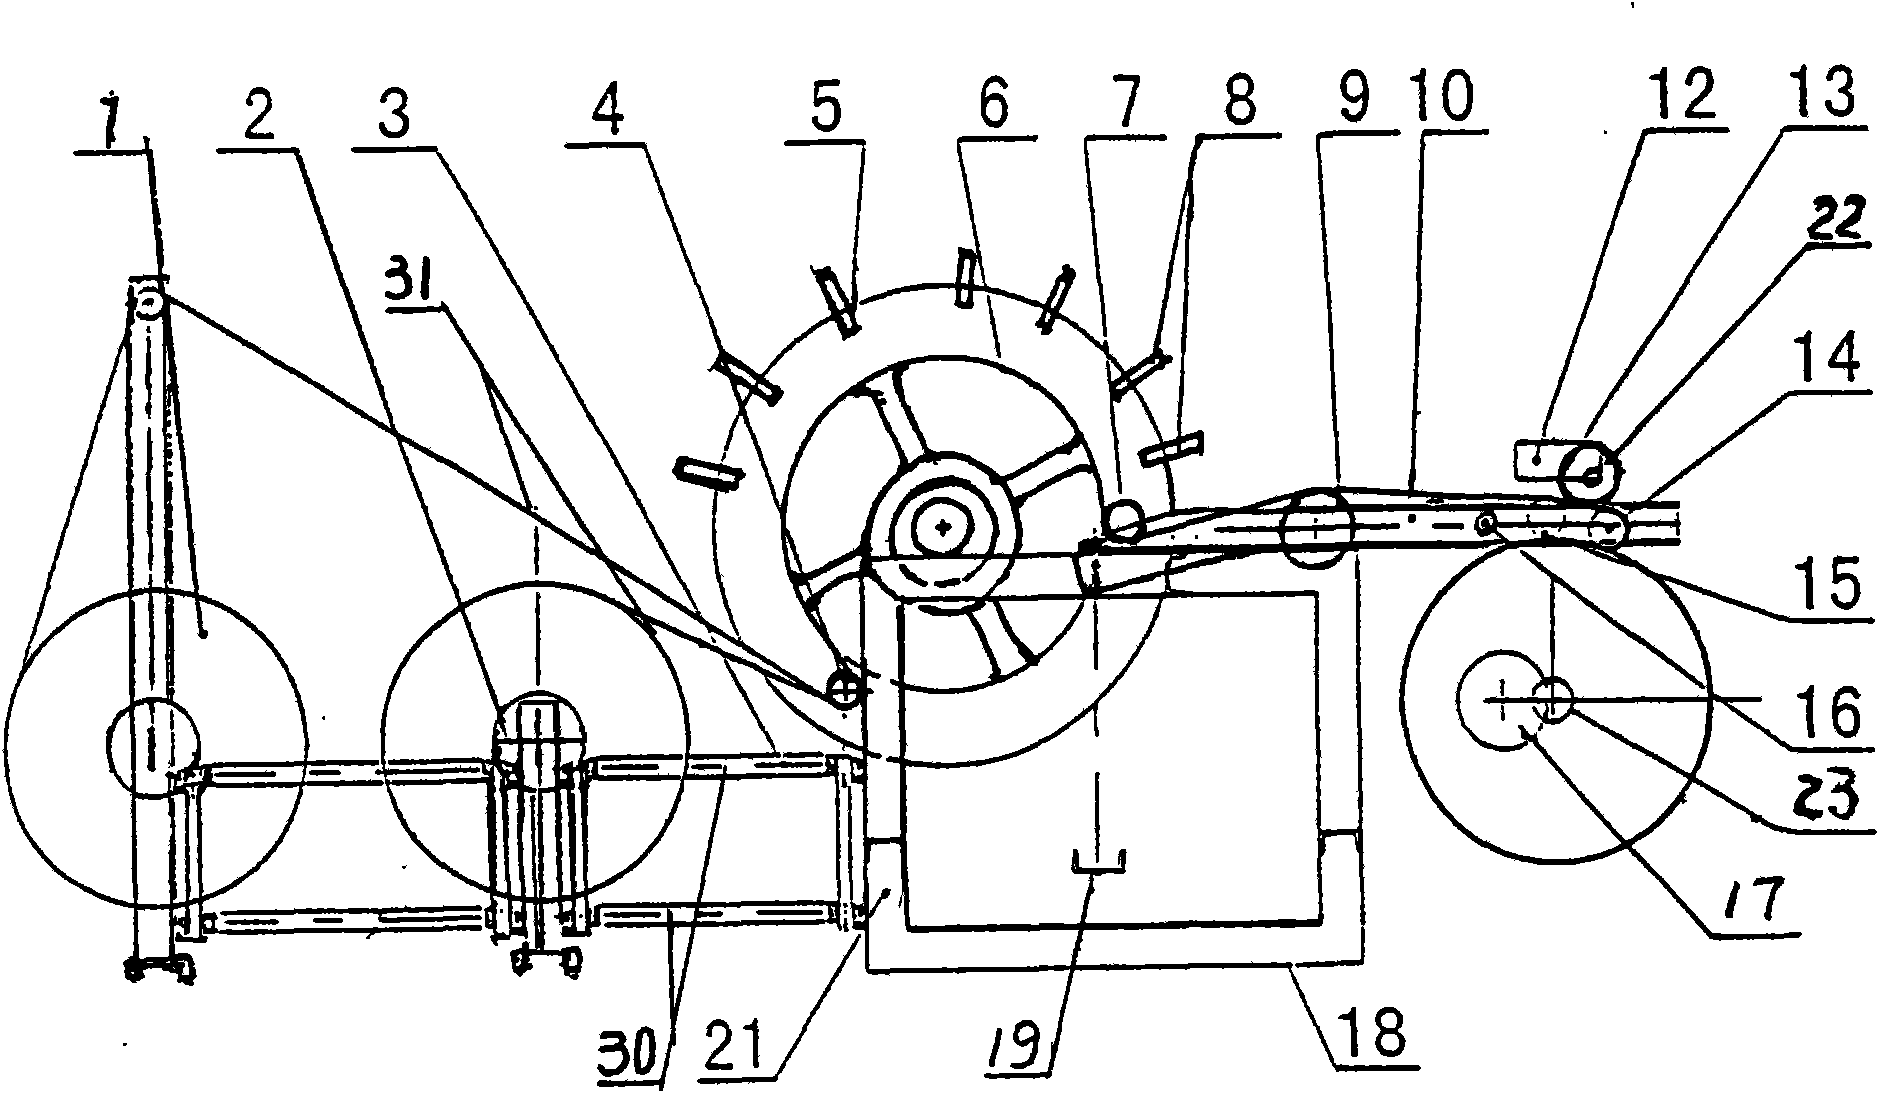 Electret, dividing and cutting machine for non-weaving cloth